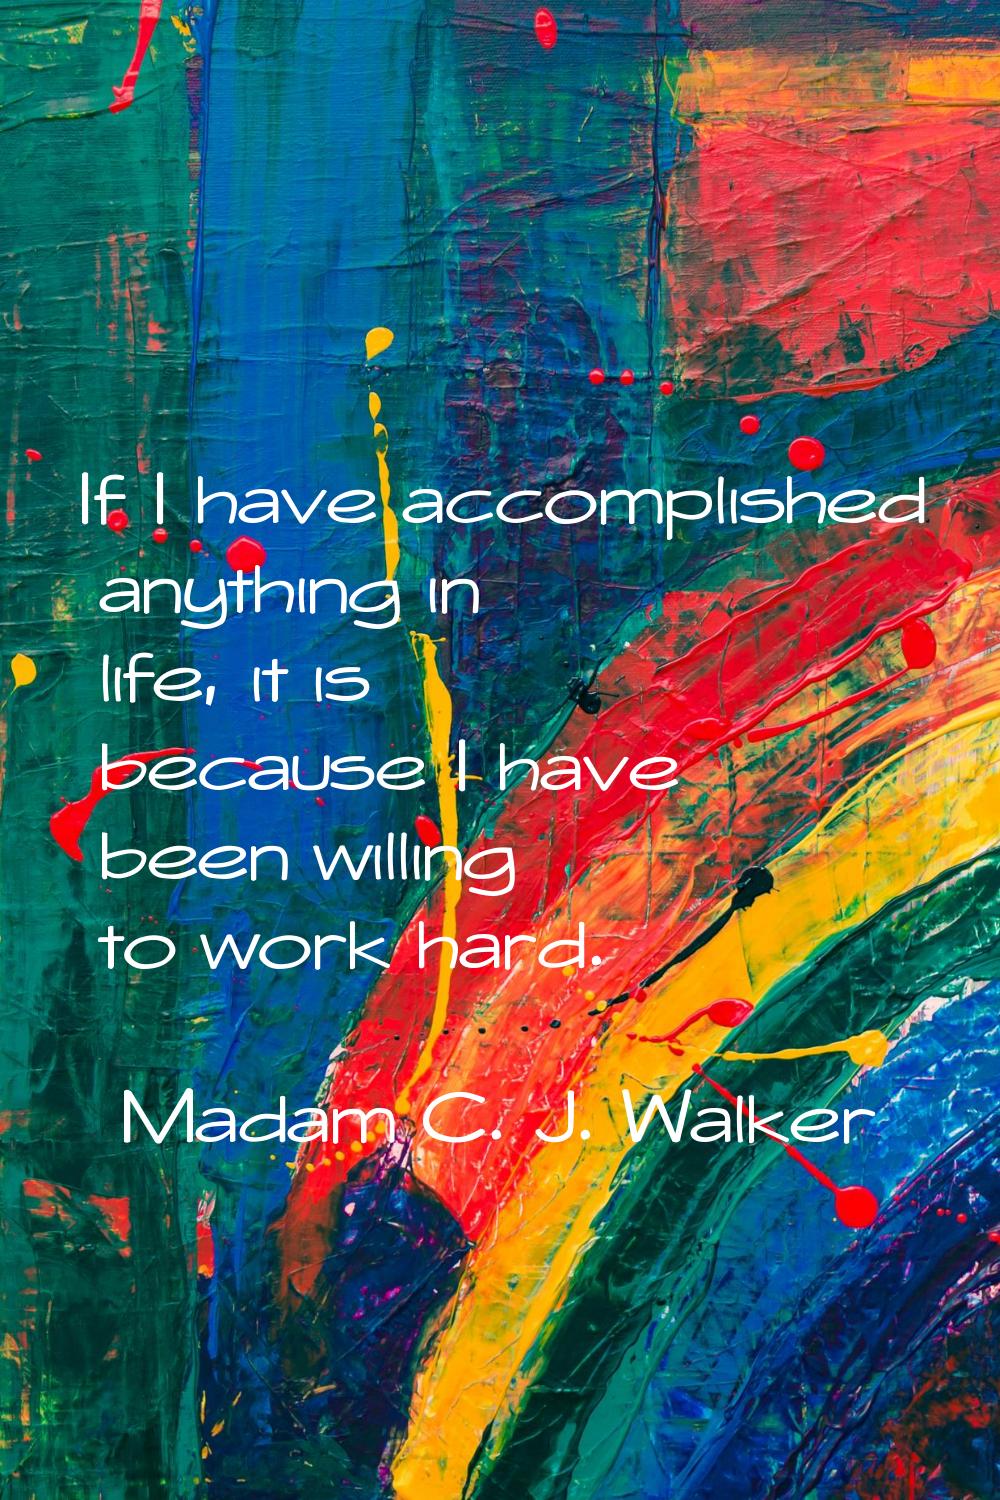 If I have accomplished anything in life, it is because I have been willing to work hard.